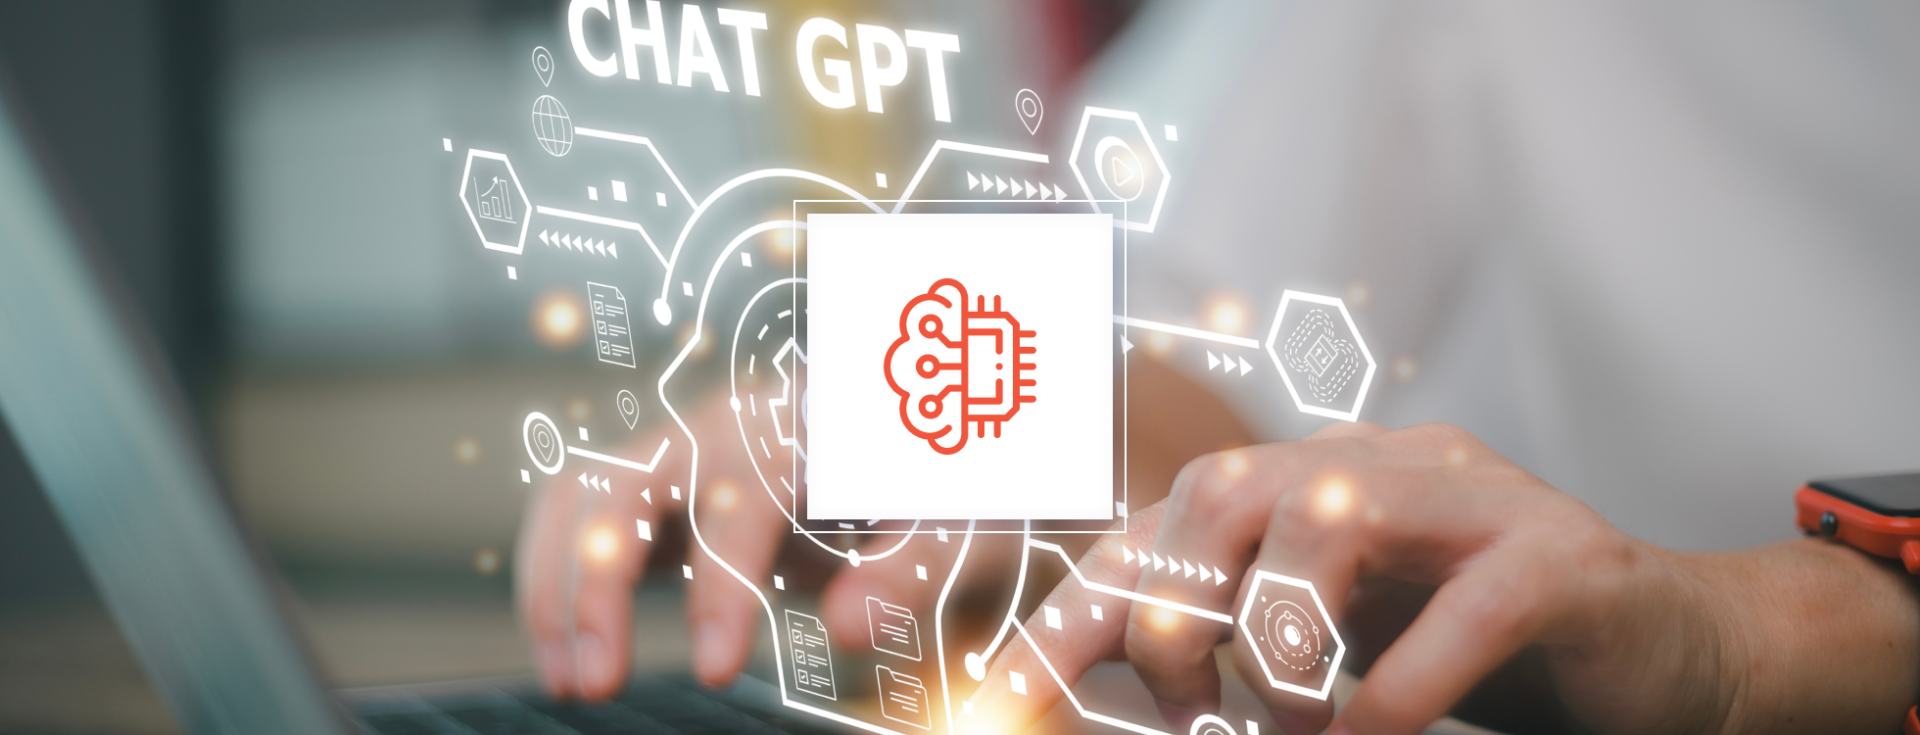 ChatGPT Integration: Why It Cannot be Connected Out of the Box for Business